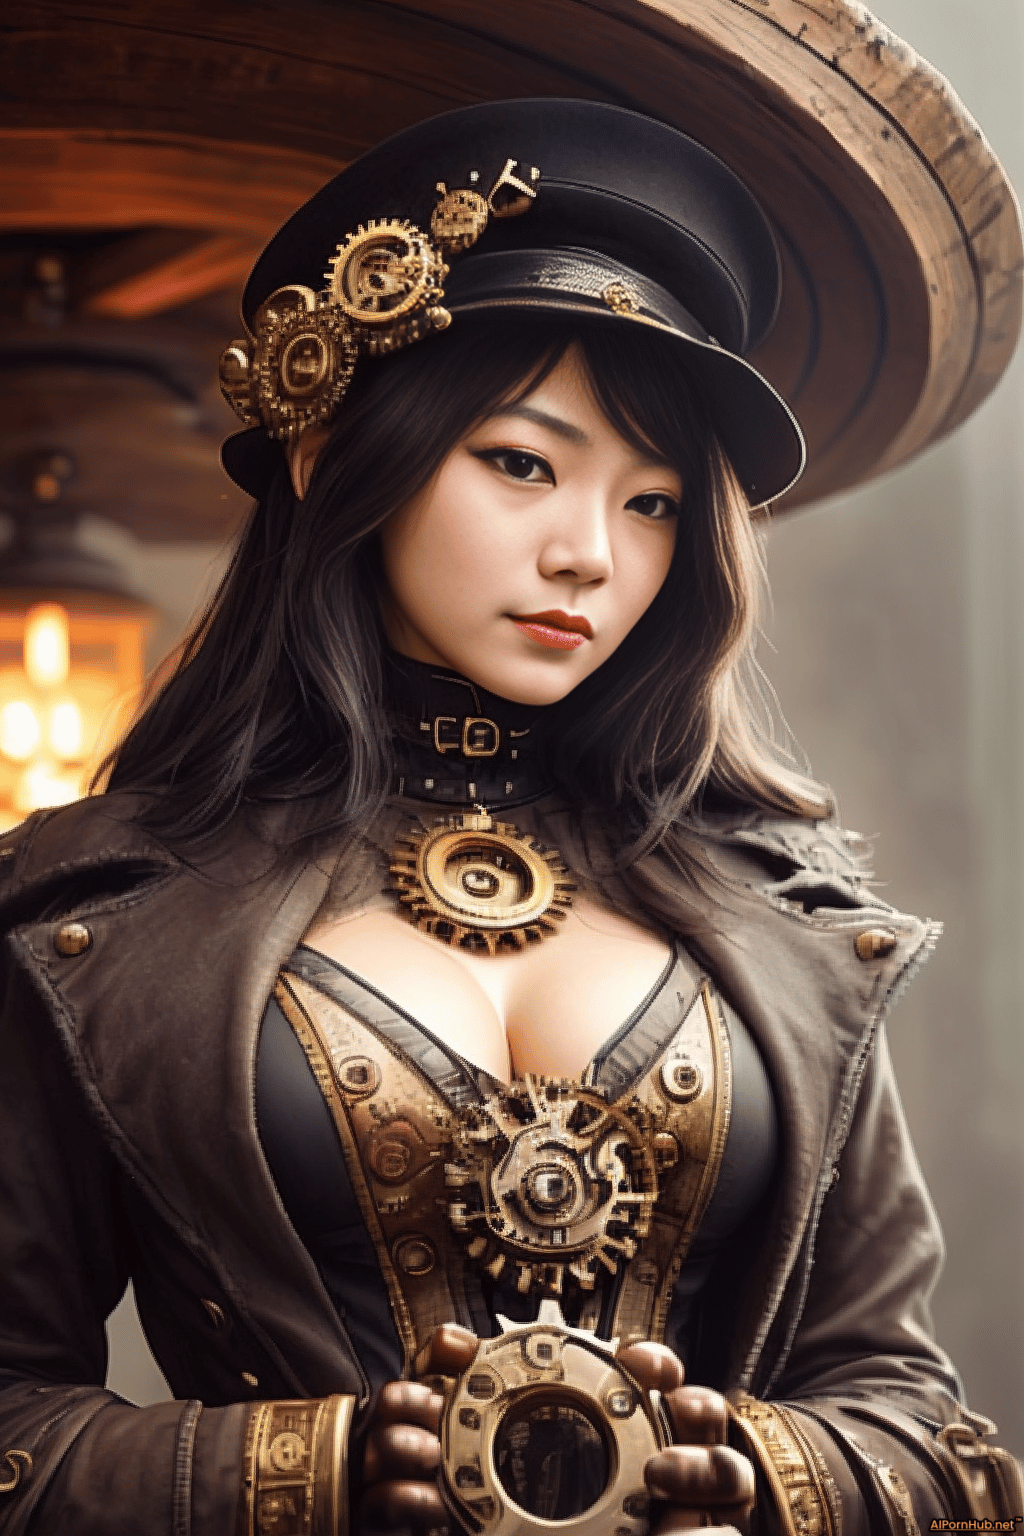 A steampunk girl in a hat and leather jacket - Steampunk